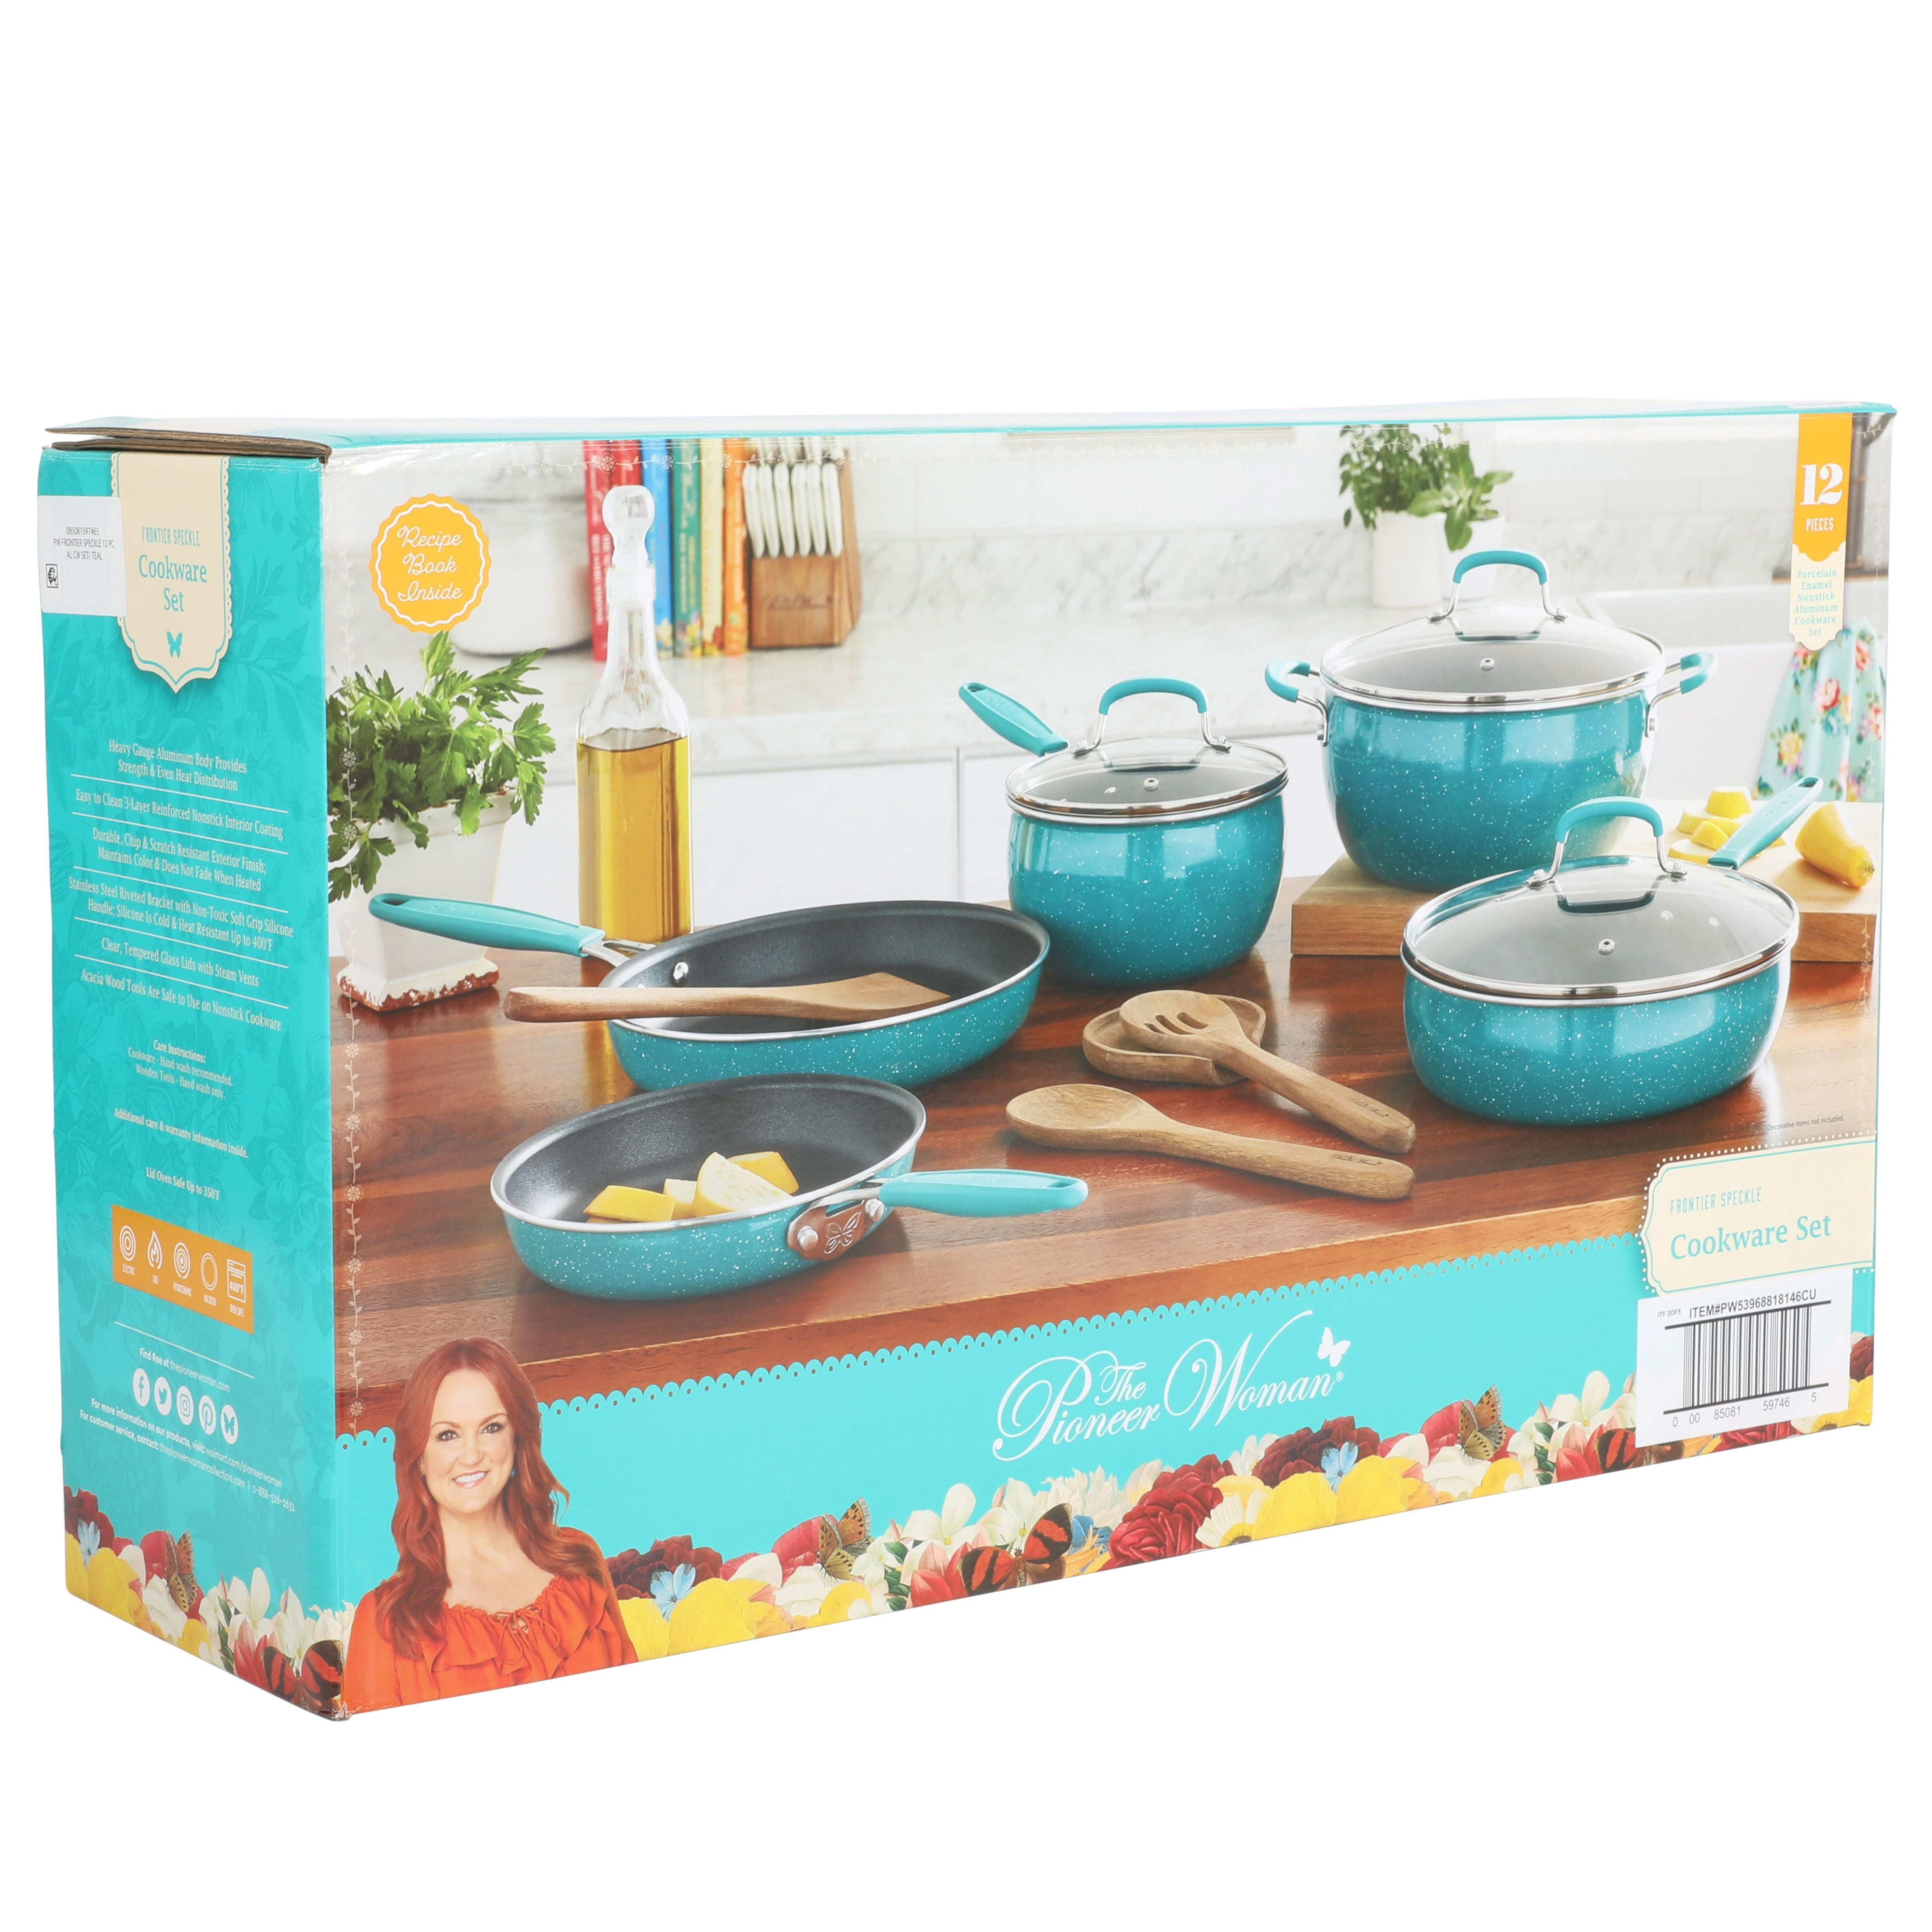 The Pioneer Woman Frontier Speckle Aluminum 12-inch Everyday Pan, Turquoise